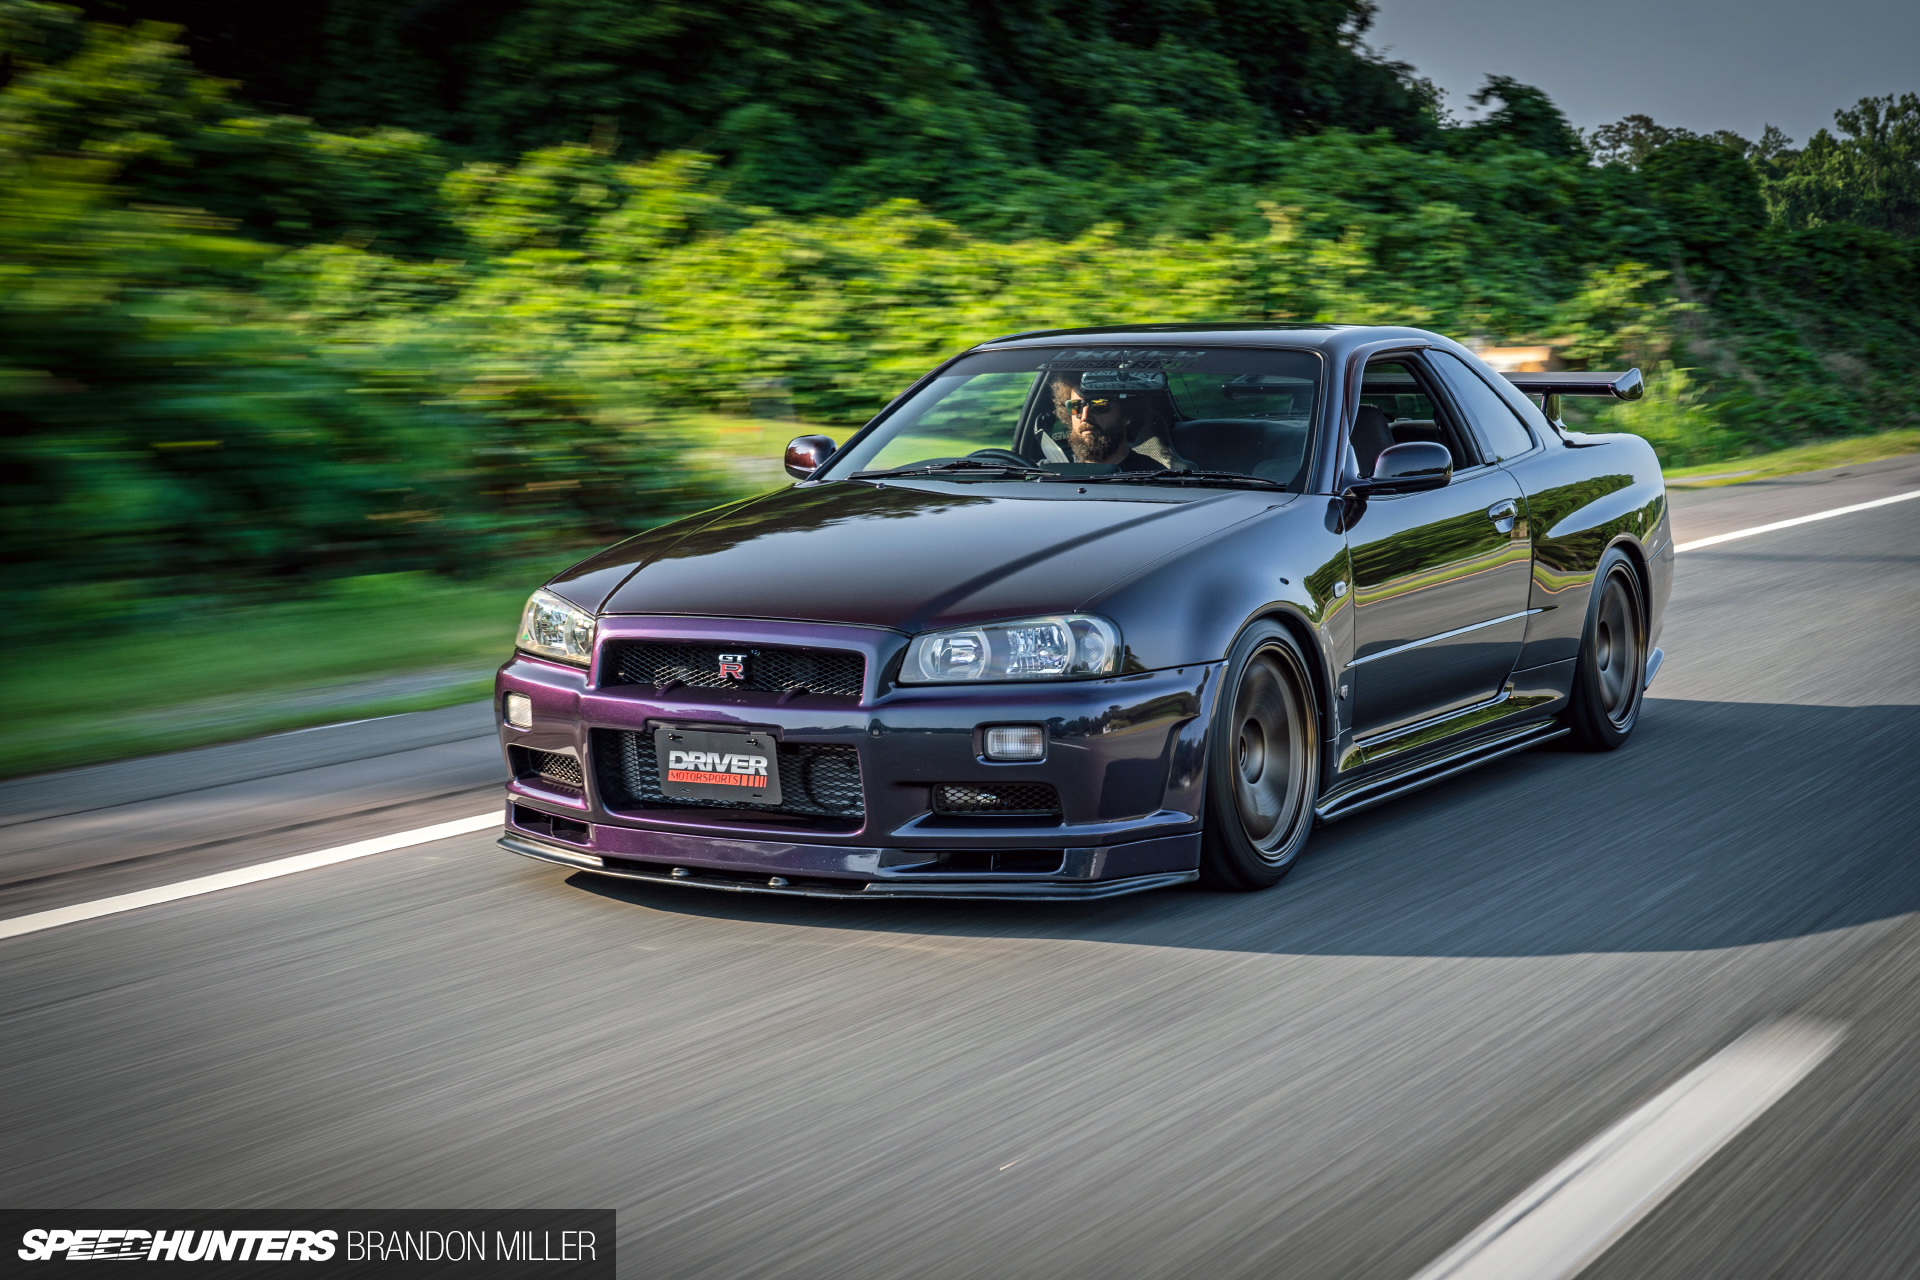 Why the Nissan Skyline GT-R Is a Cultural Icon